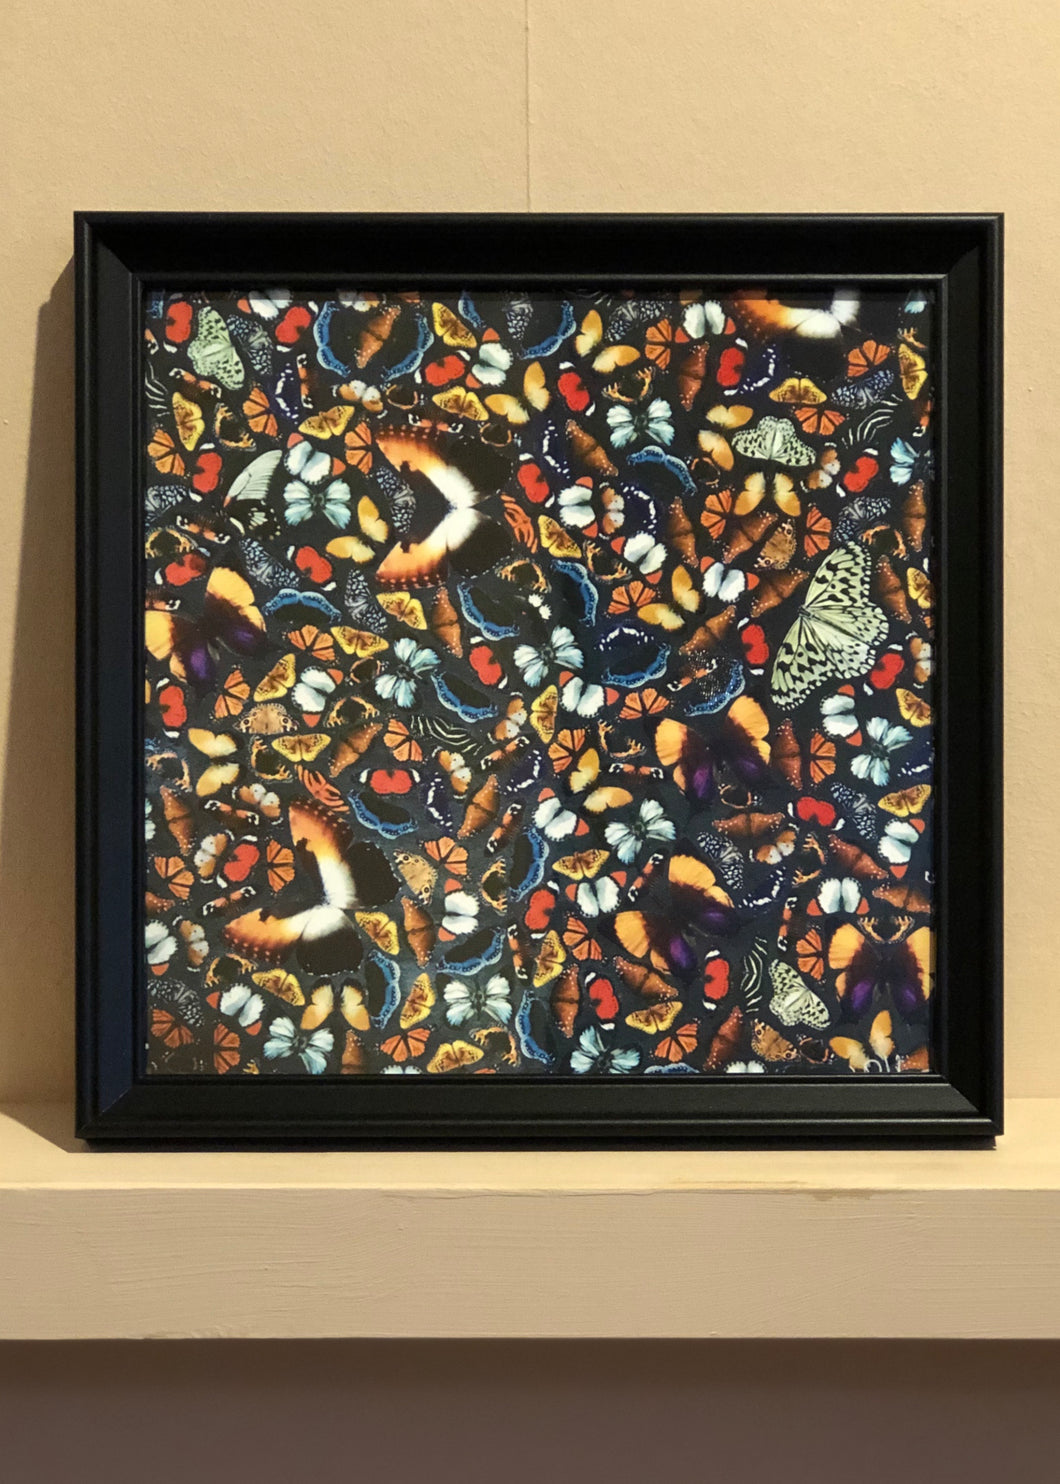 Butterfly - Framed print (square)